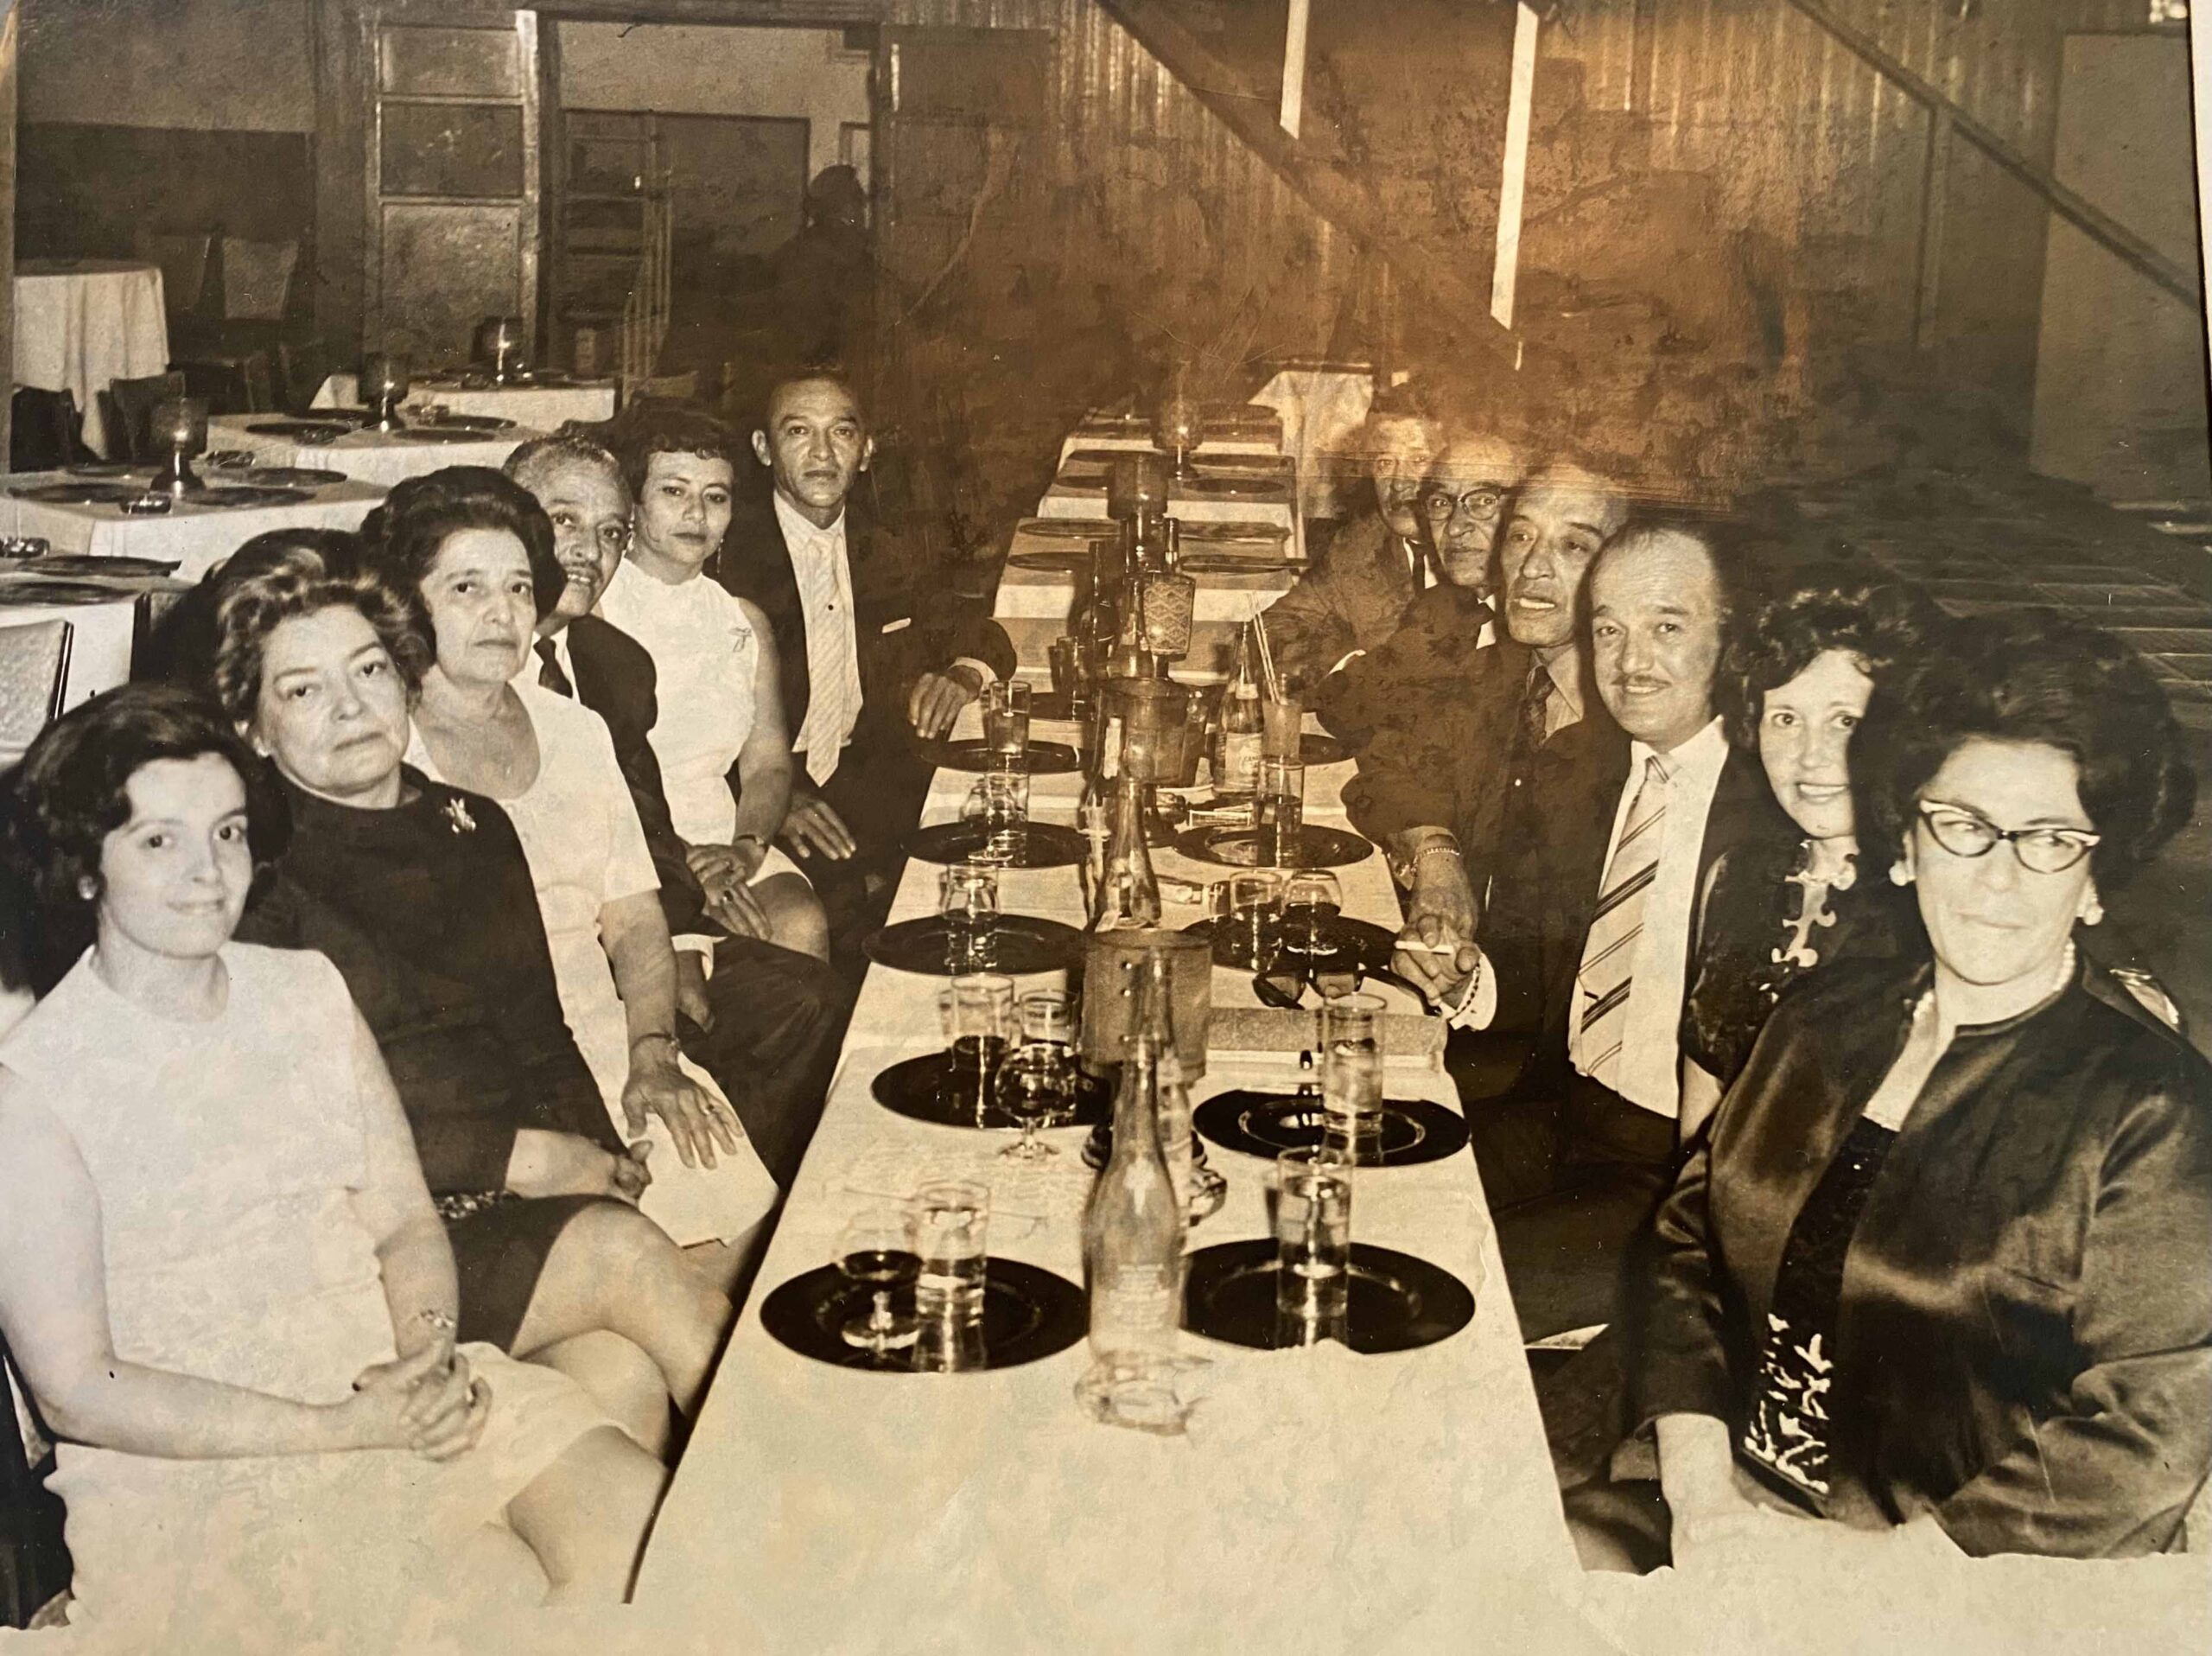 Old photo of people sitting at a table